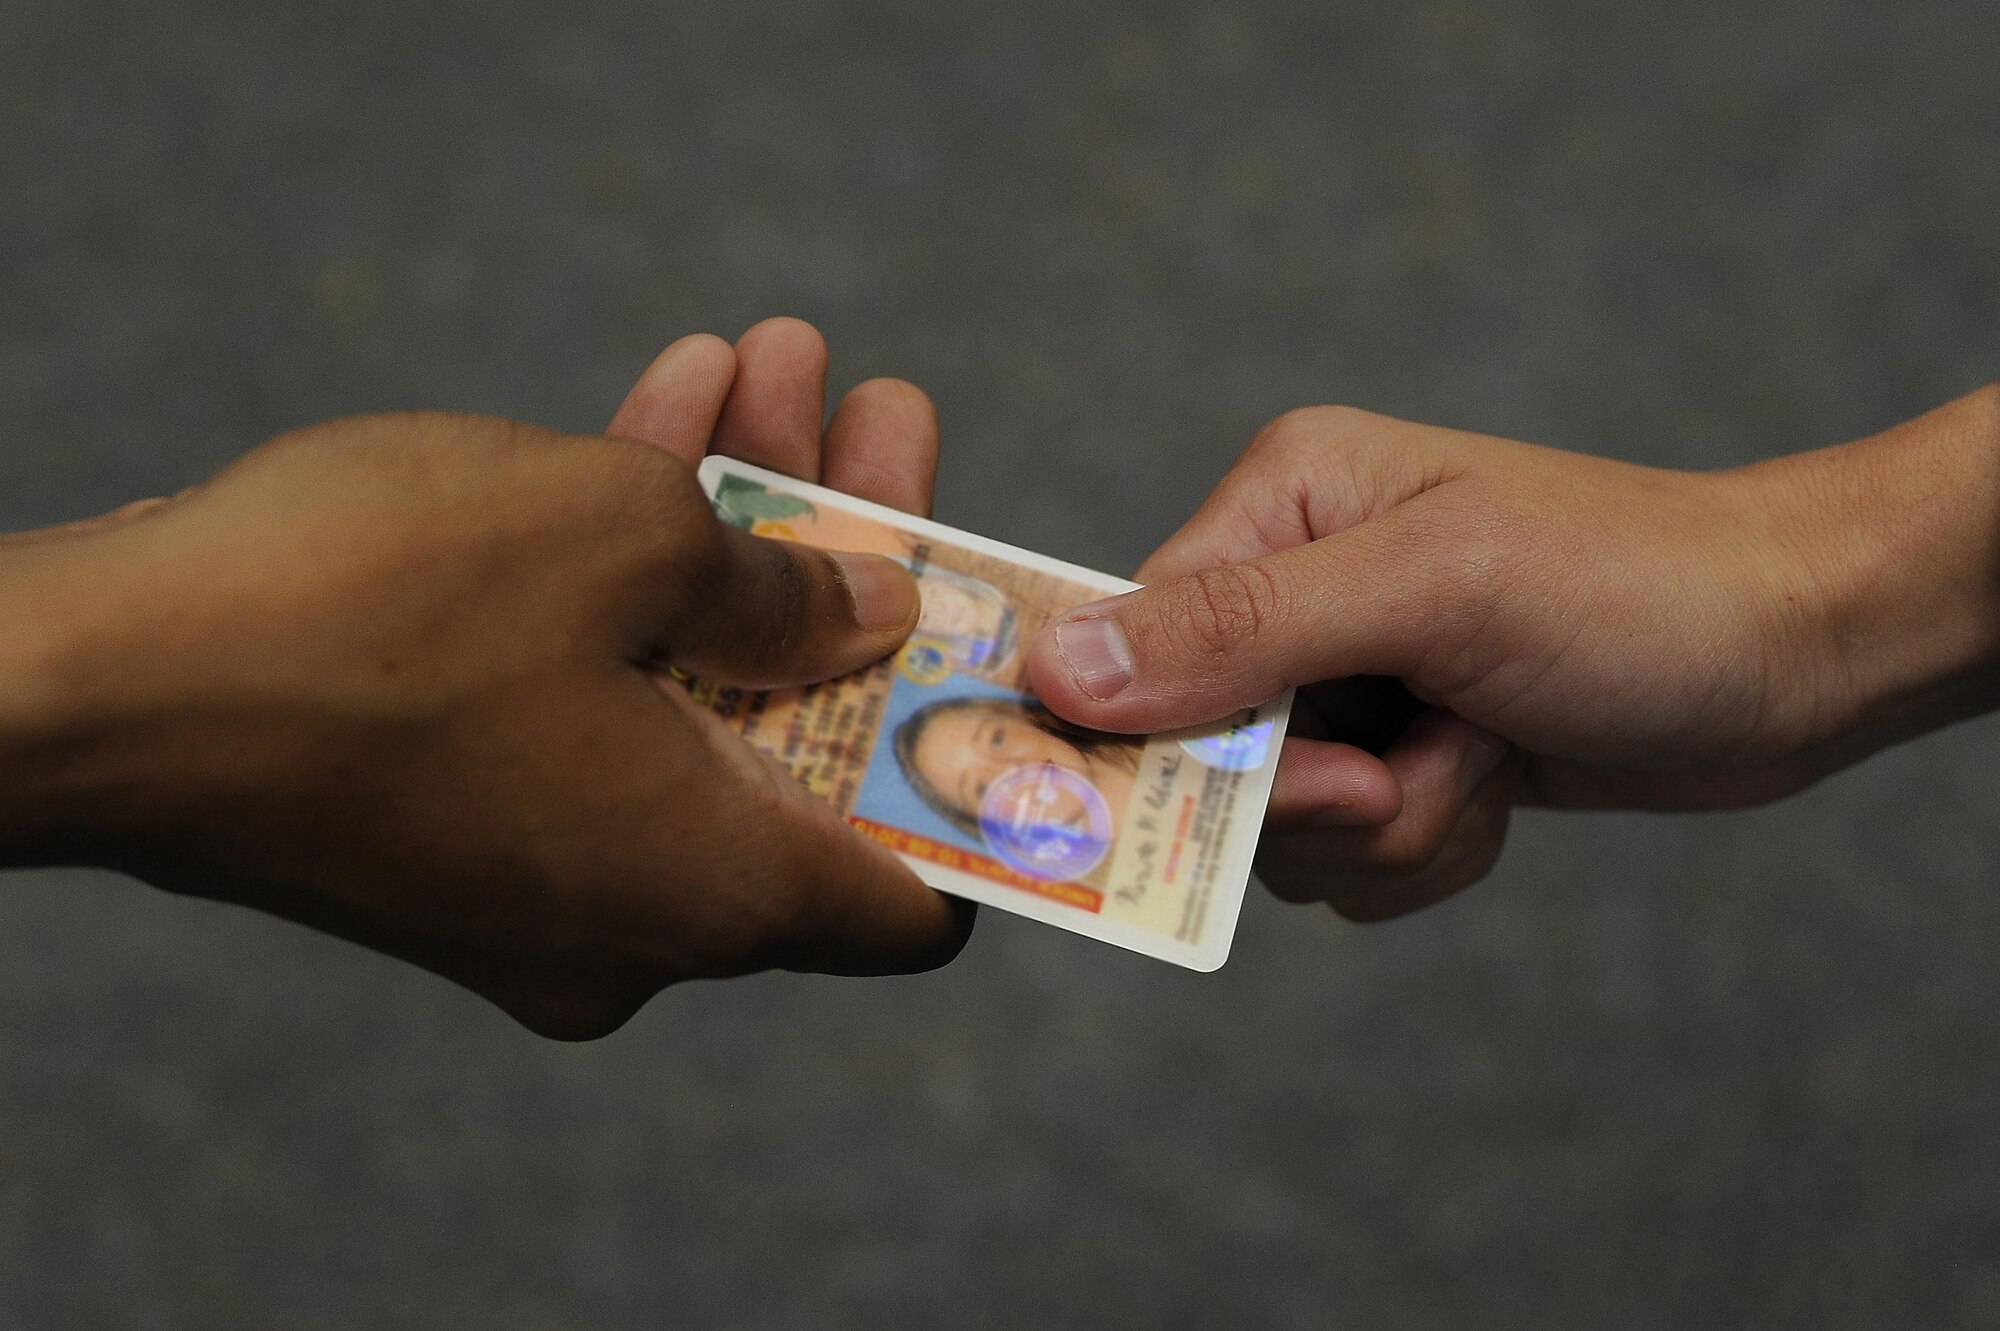 Beginning Sept. 15, 2016, MacDill Air Force Base, Florida, will not accept forms of identification from non-compliant REAL ID Act states and territories. Individuals with non-compliant IDs will be required to provide an alternative form of identification. (U.S. Air Force photo by Airman 1st Class Mariette Adams)